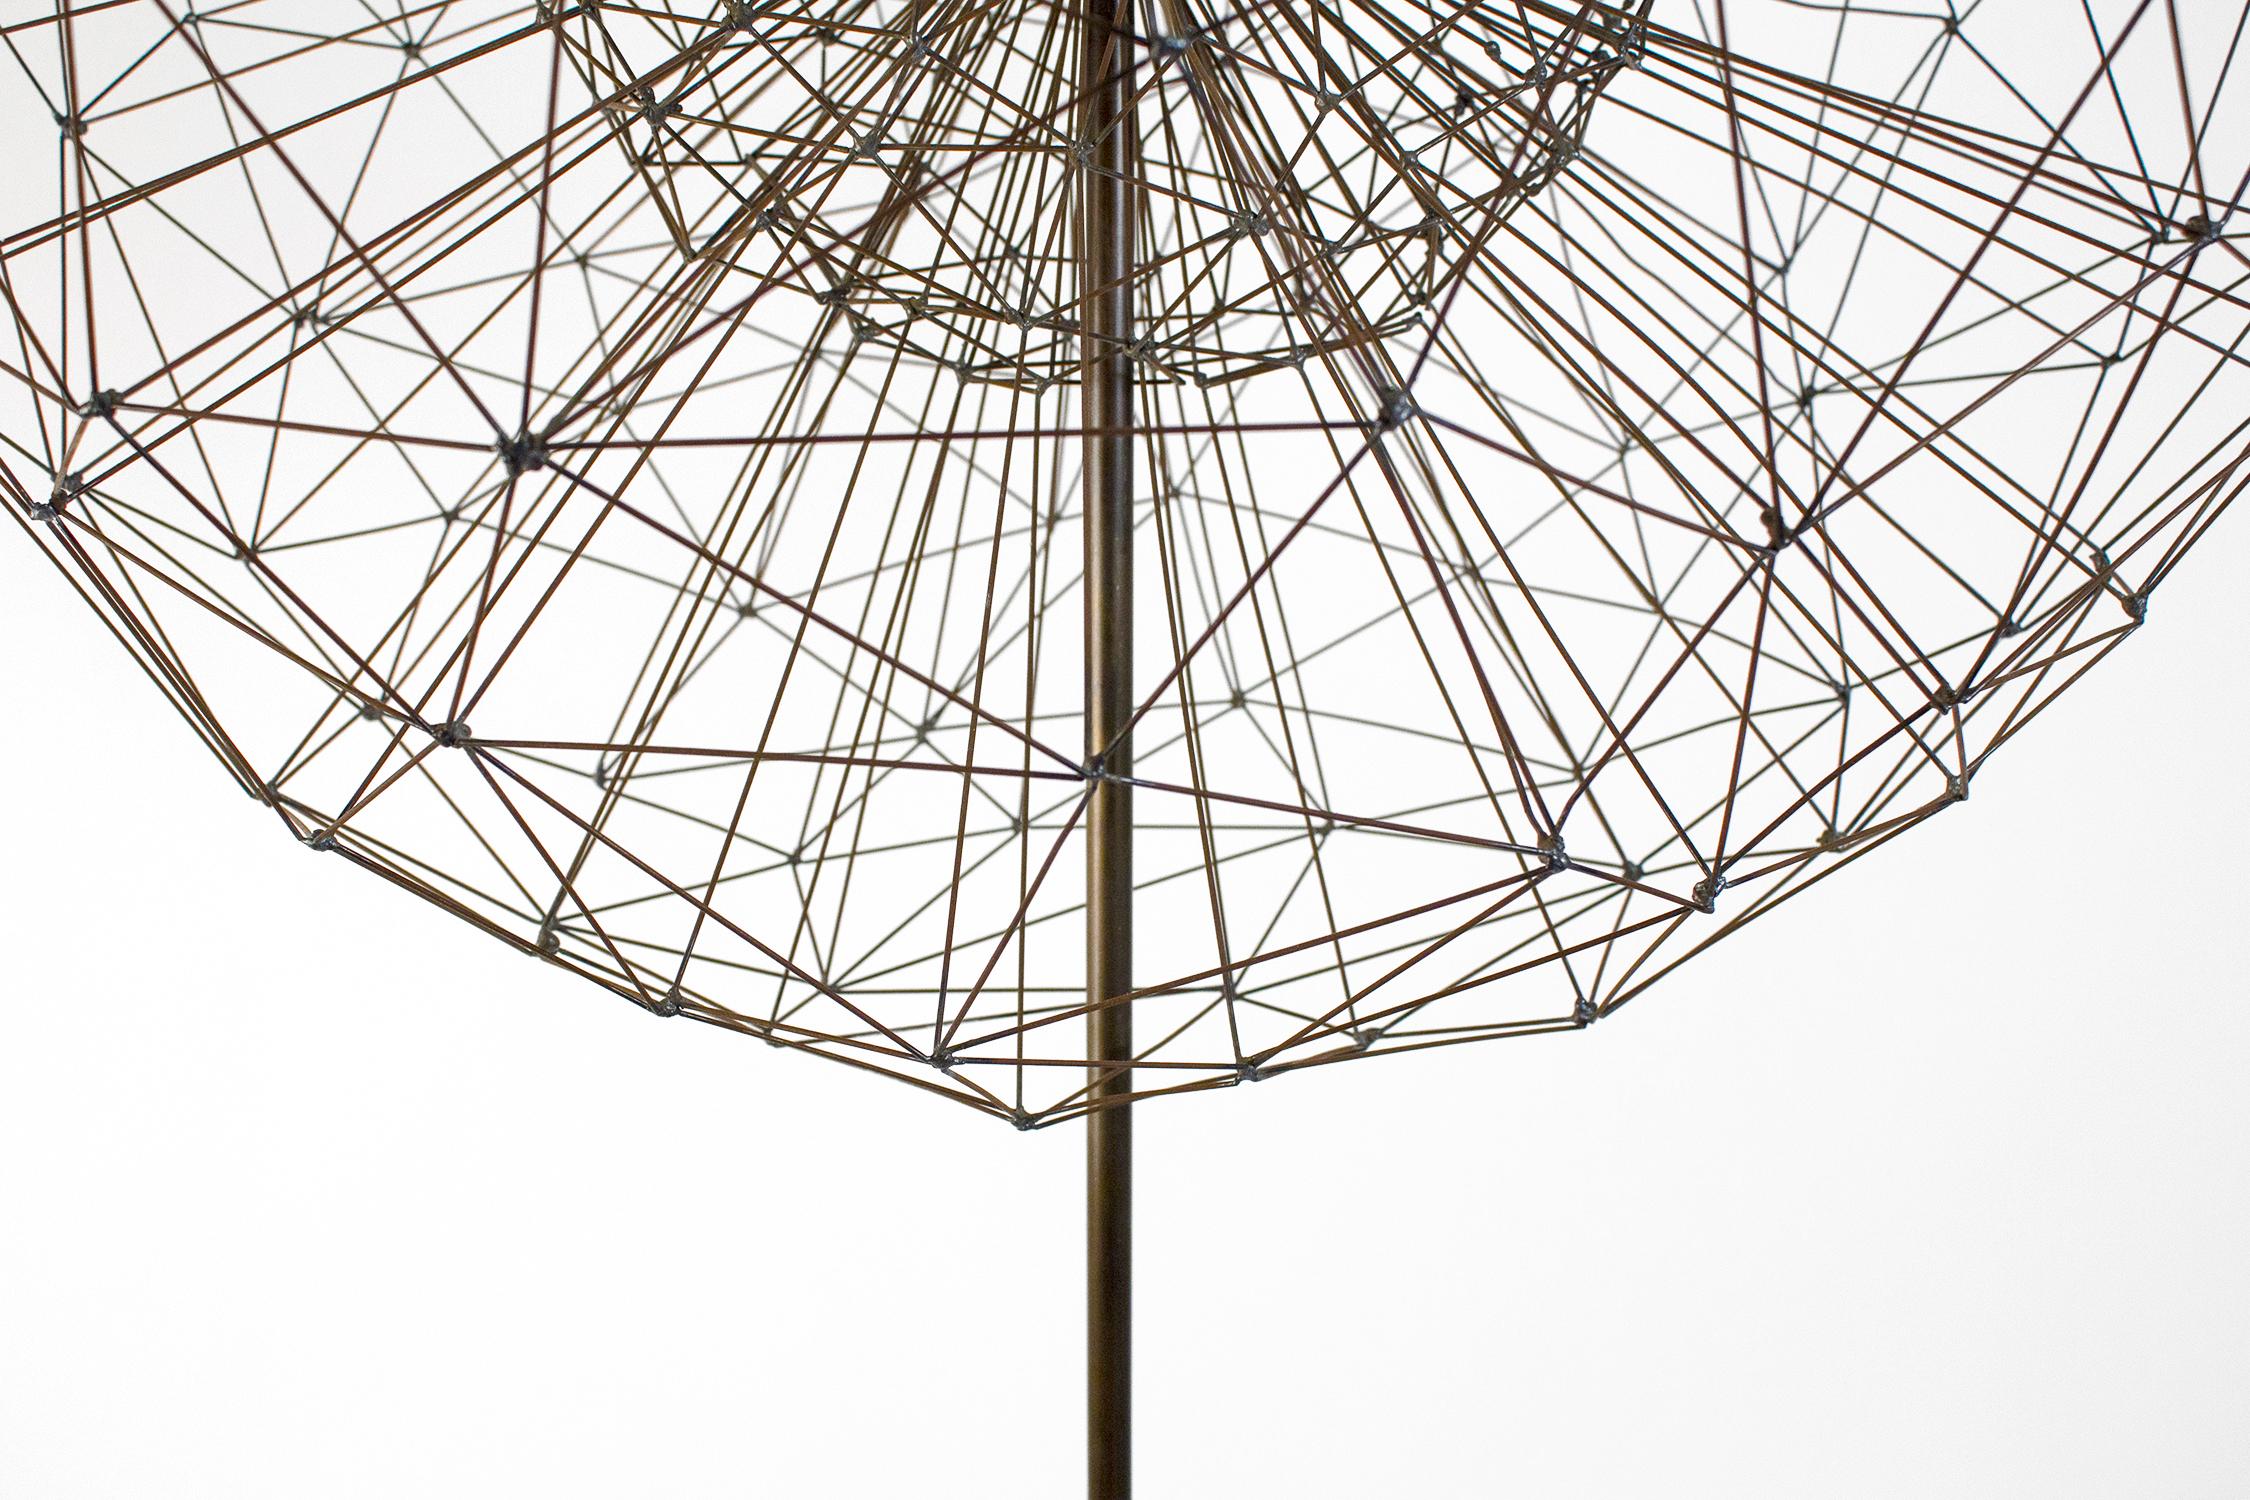 American Abstract Dandelion Sculpture in the Style of Harry Bertoia, 1965